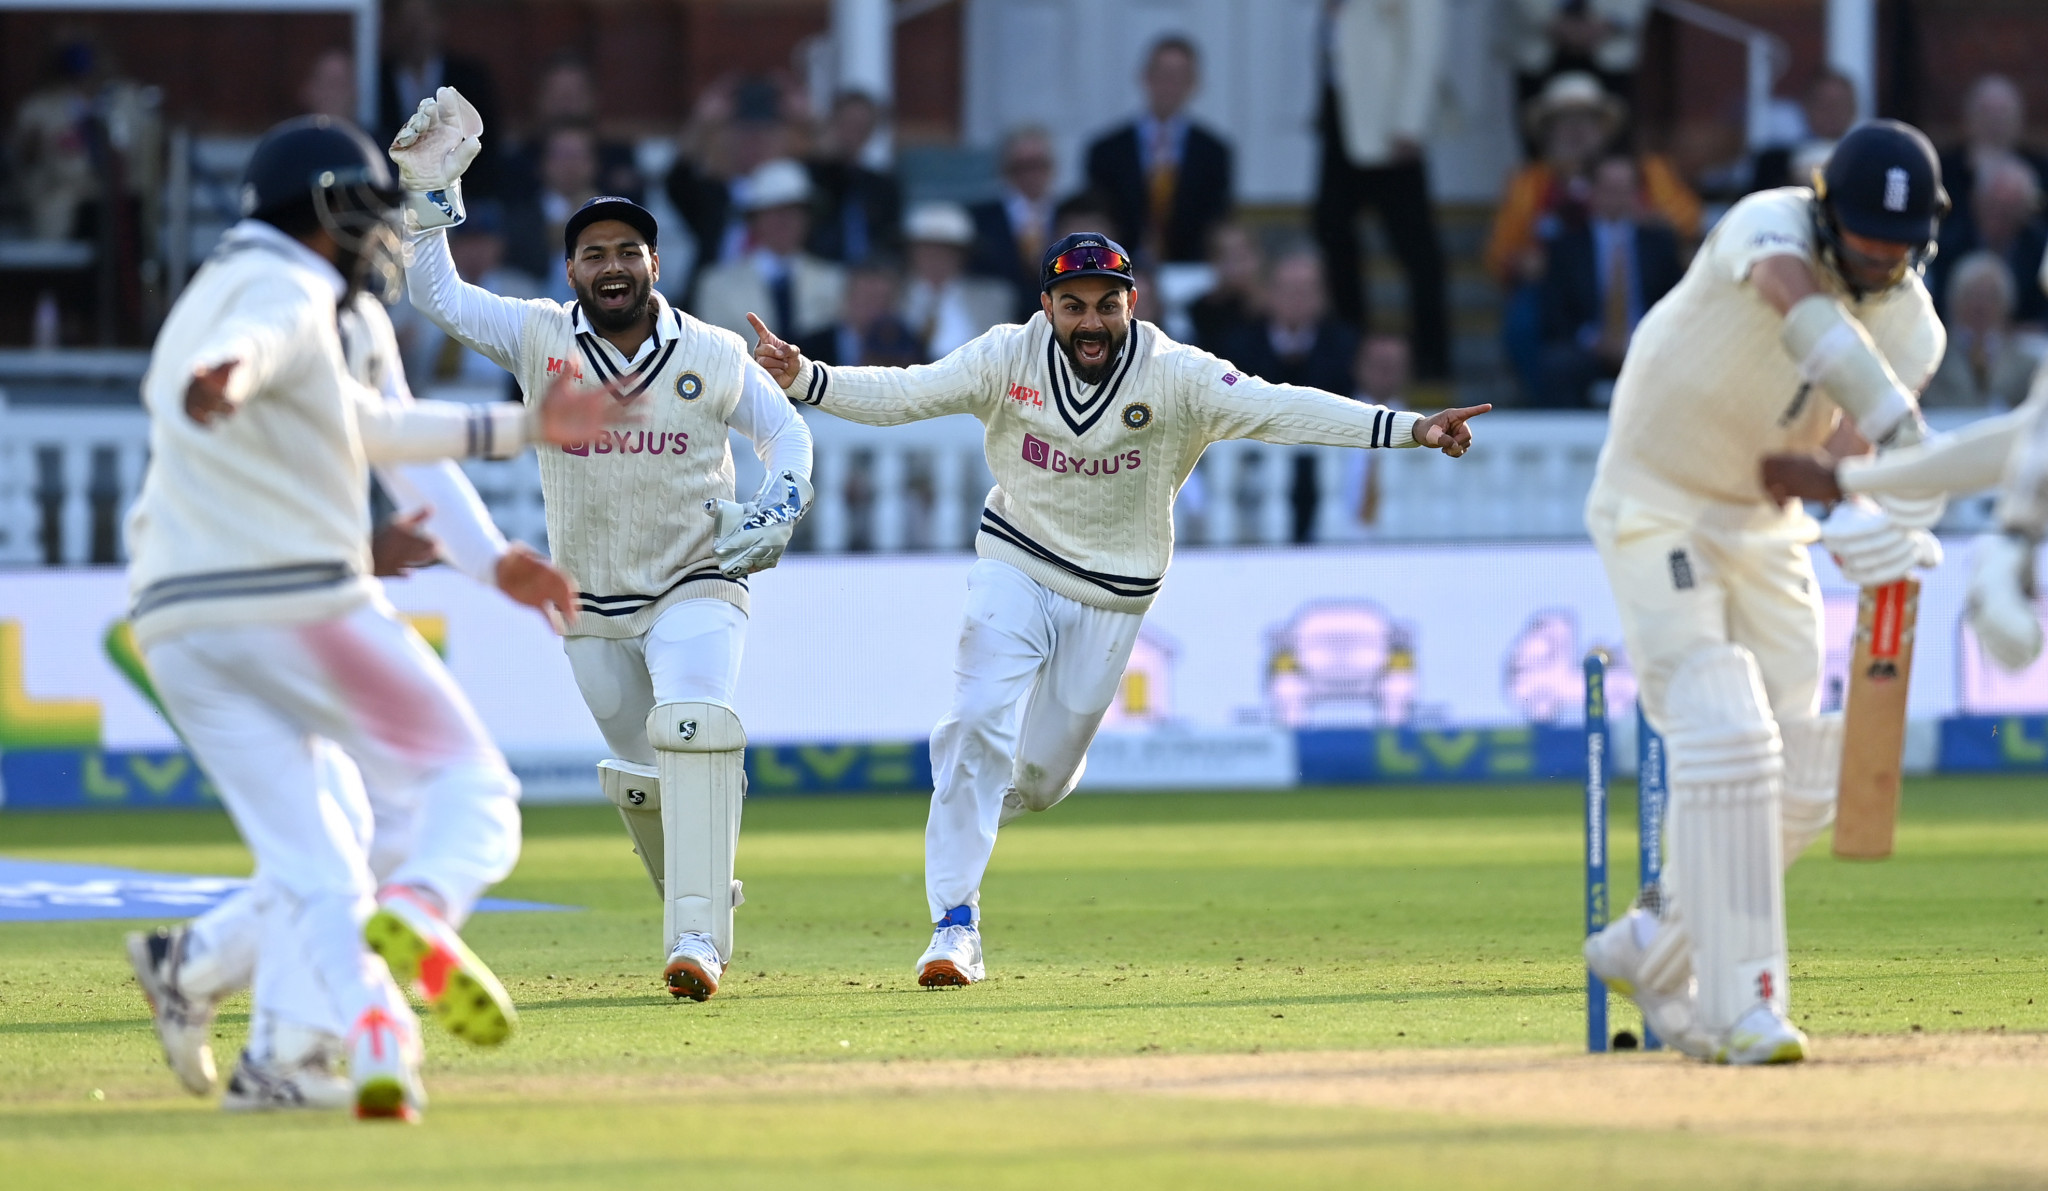 India lead the five-Test series 2-1 ©Getty Images